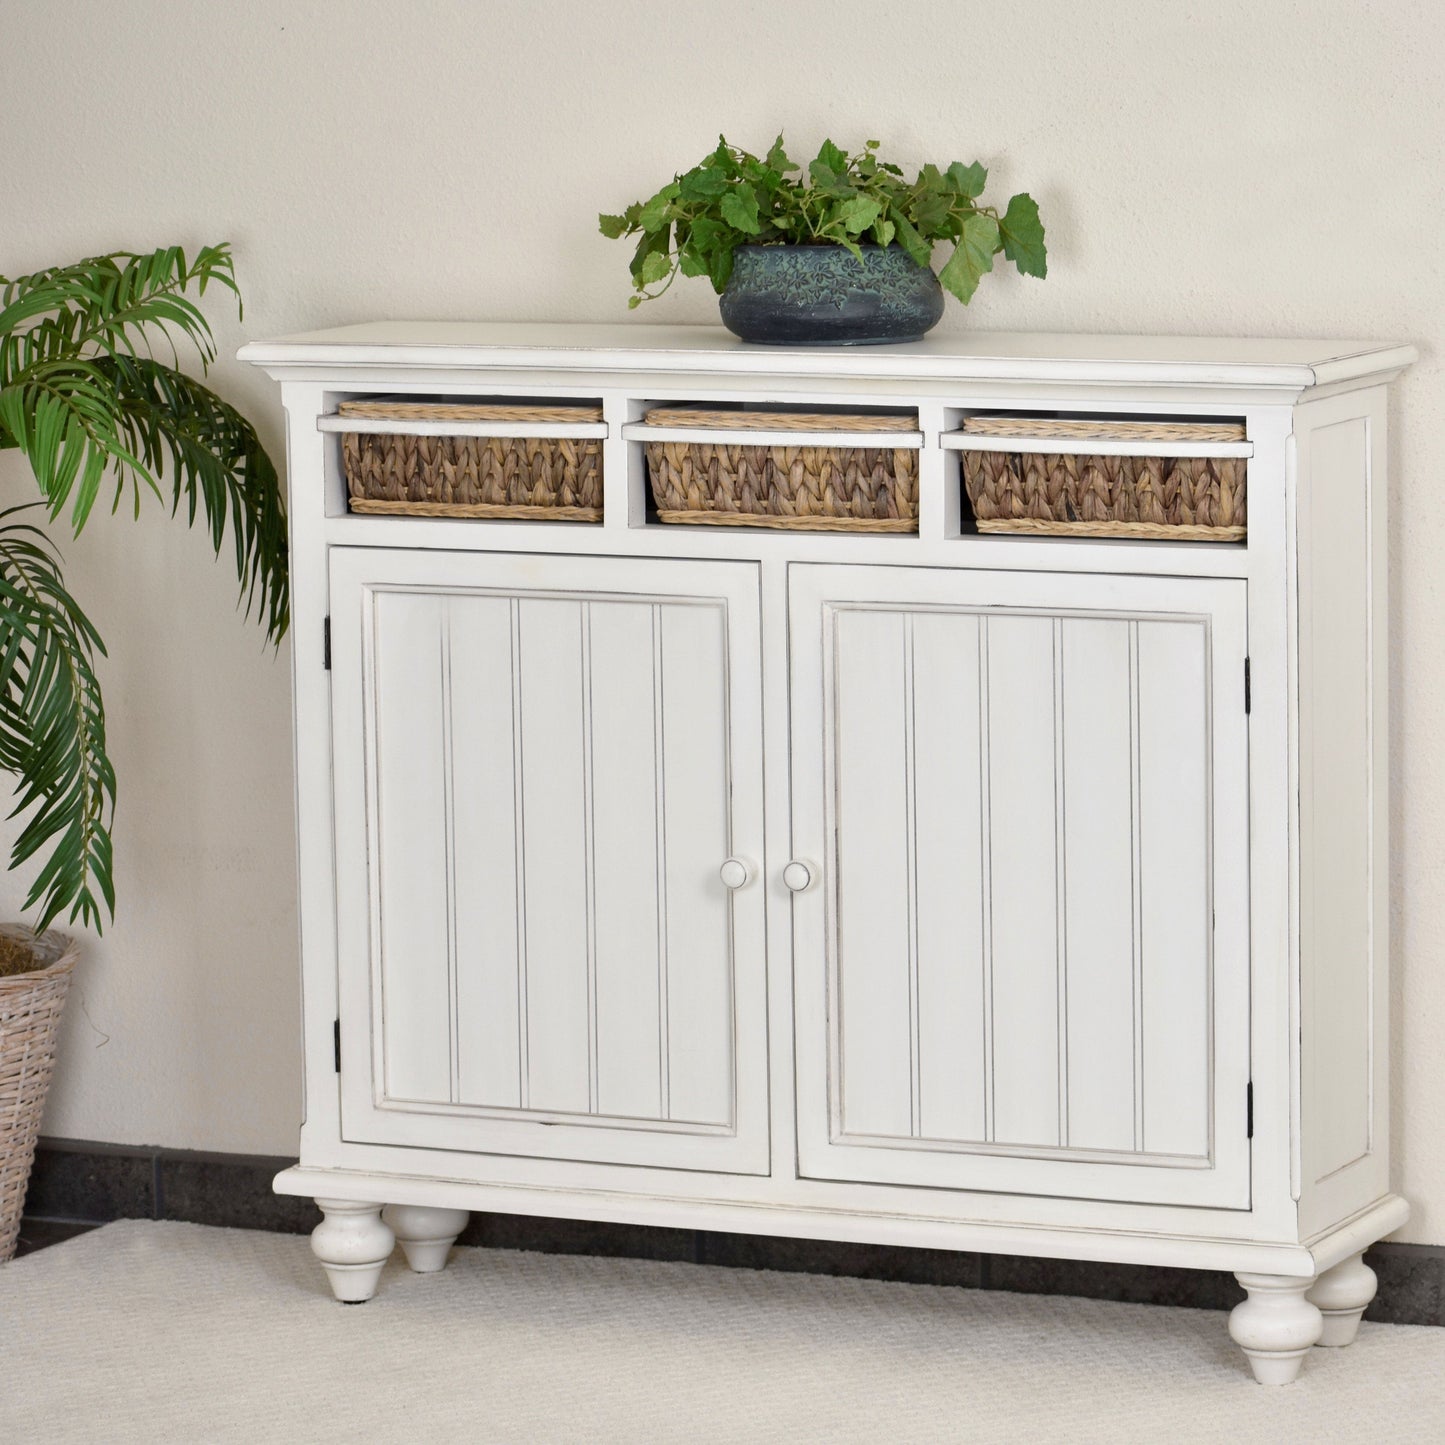 Sea Winds Trading Monaco Entry Cabinets with Baskets B81822 Indoor Sea Winds Trading Co 